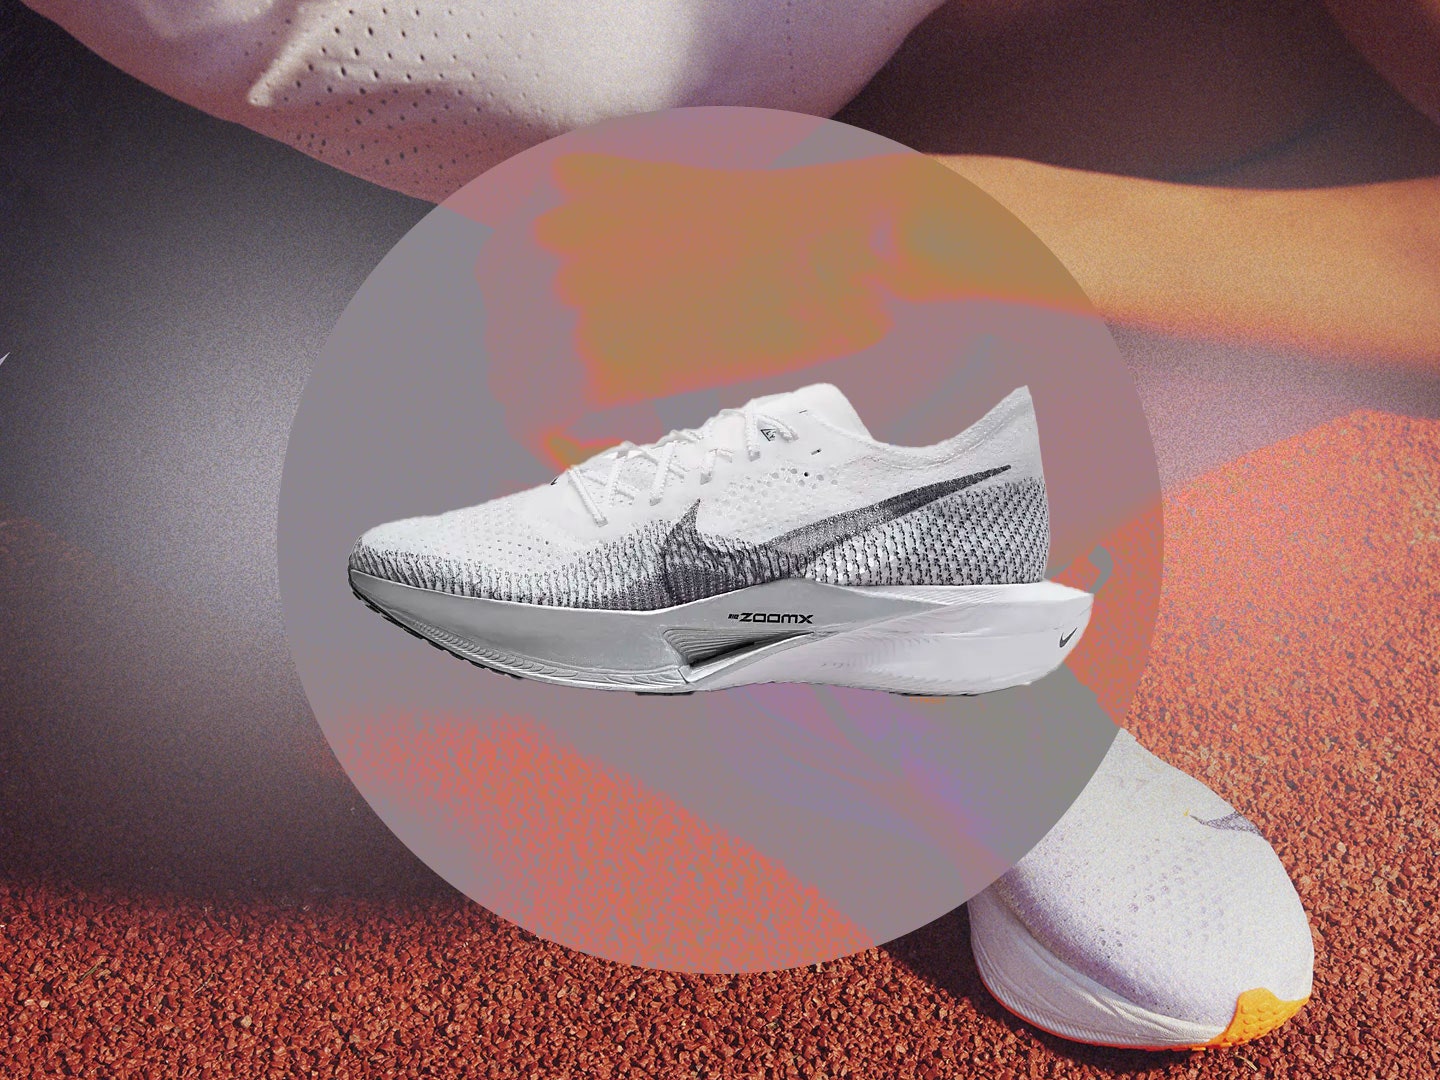 The Nike Vaporfly 3 is your ticket to freakish running speeds